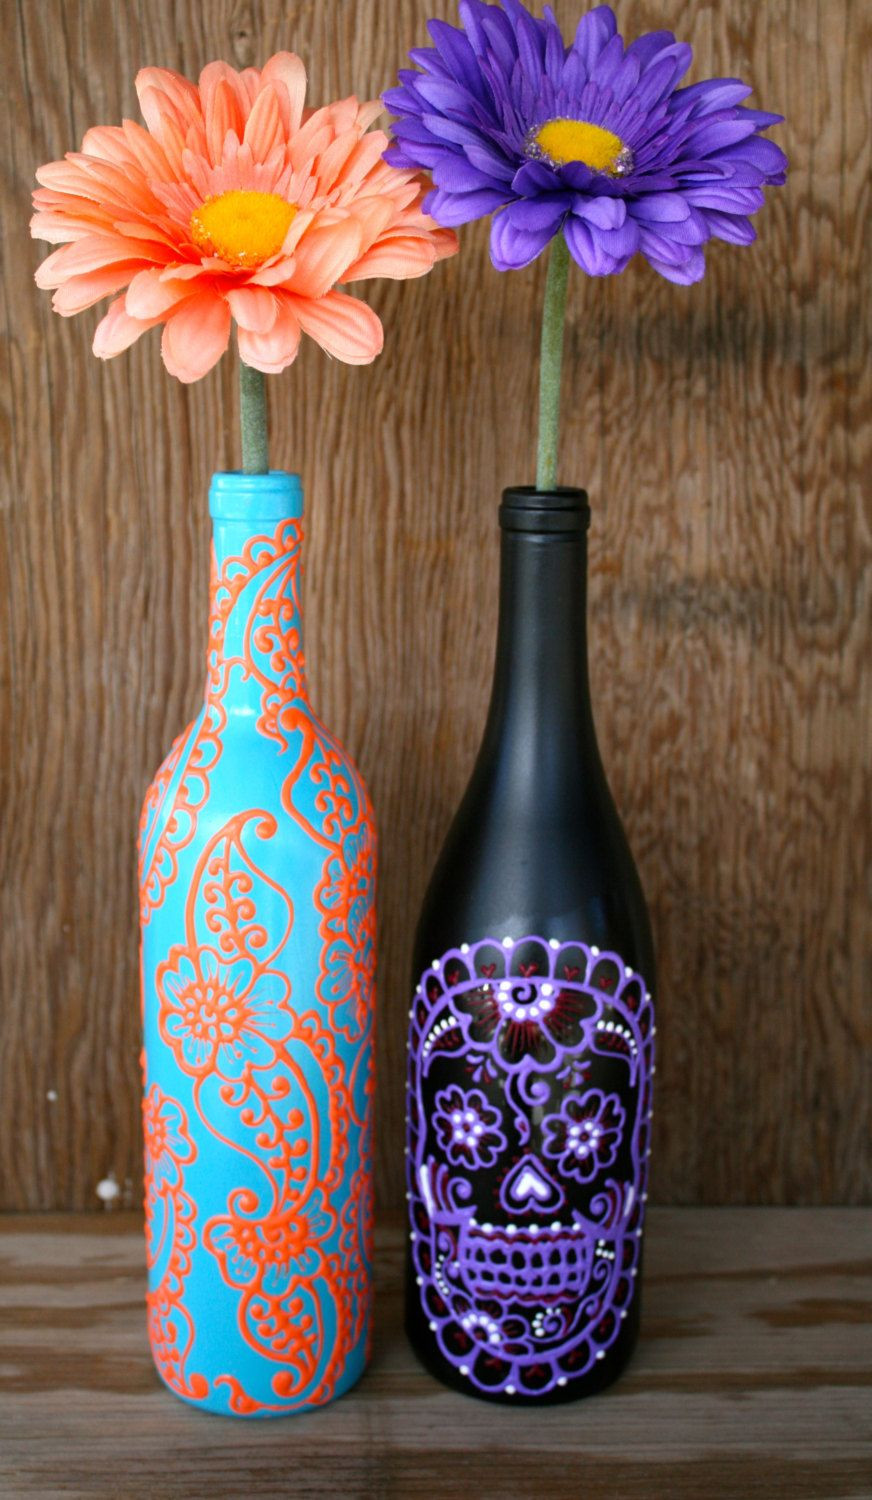 30 Nice Glass Vase Painting Ideas 2024 free download glass vase painting ideas of hand painted wine bottle vase up cycled turquoise and coral orange pertaining to hand painted wine bottle vase up cycled turquoise and coral orange vibrant henna